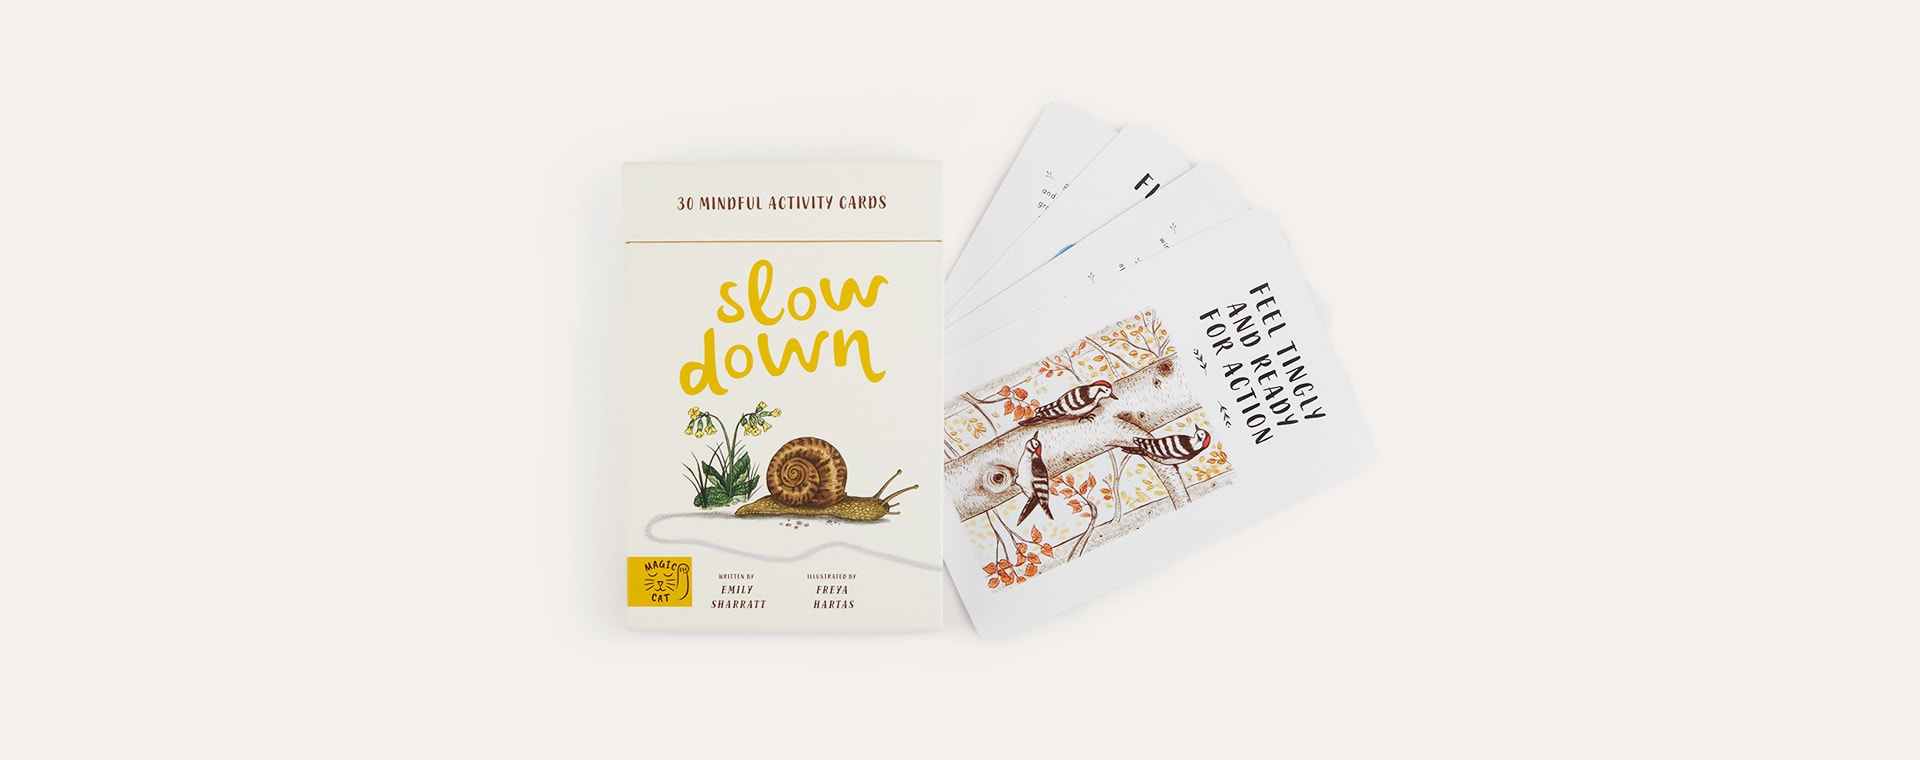 Multi bookspeed Slow Down: 30 Mindful Activity Cards